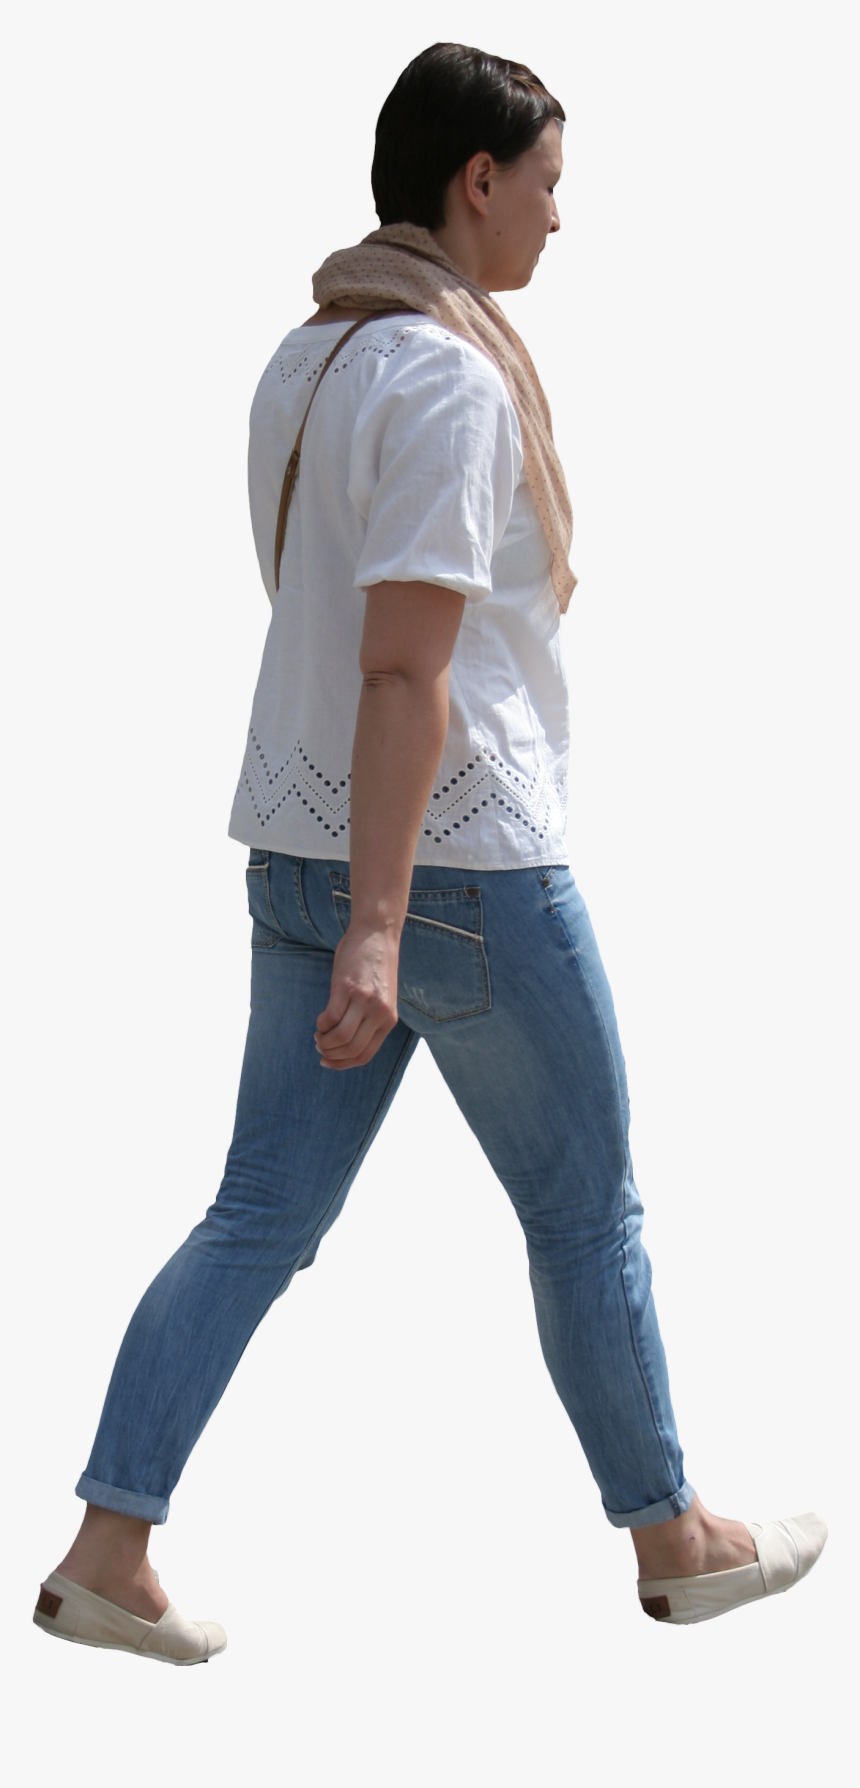 Standing People Cut Out, HD Png Download, Free Download